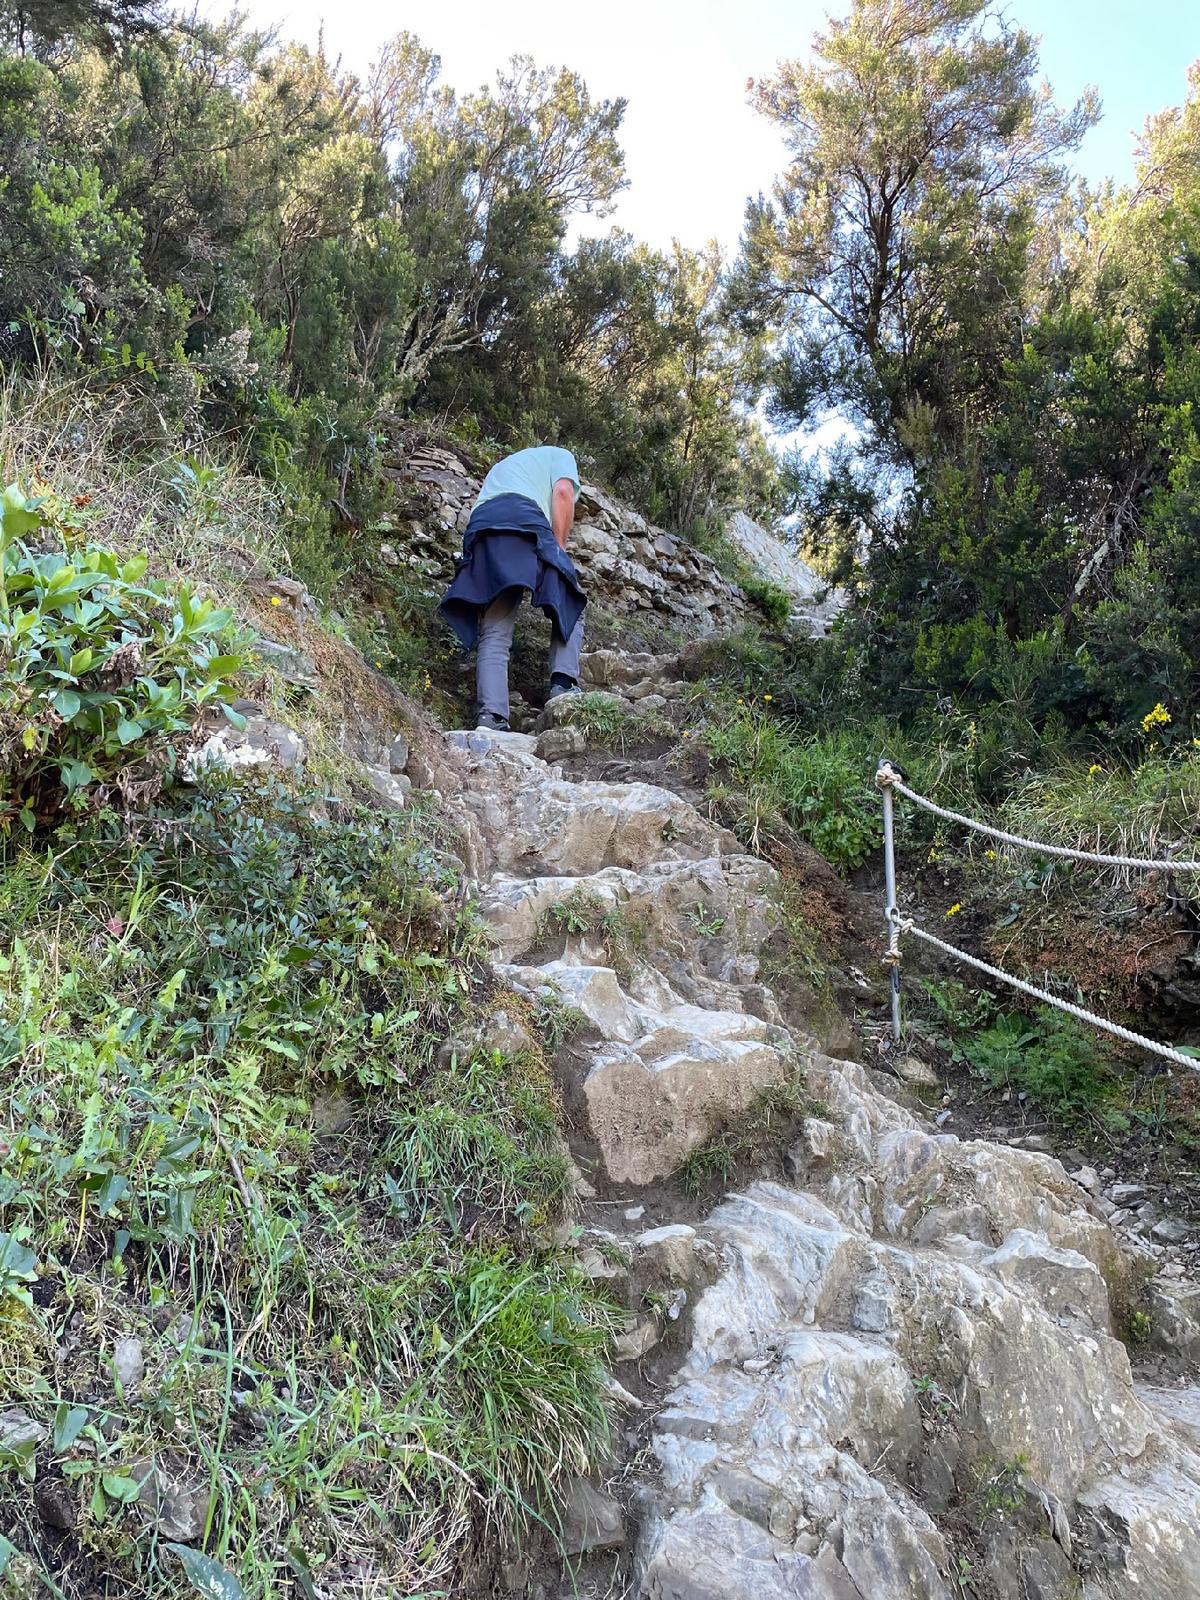 Rugged and extremely steep paths connect the five villages of Cinque Terre in Italy. (Photo courtesy of Lesley Sauls Frederikson)